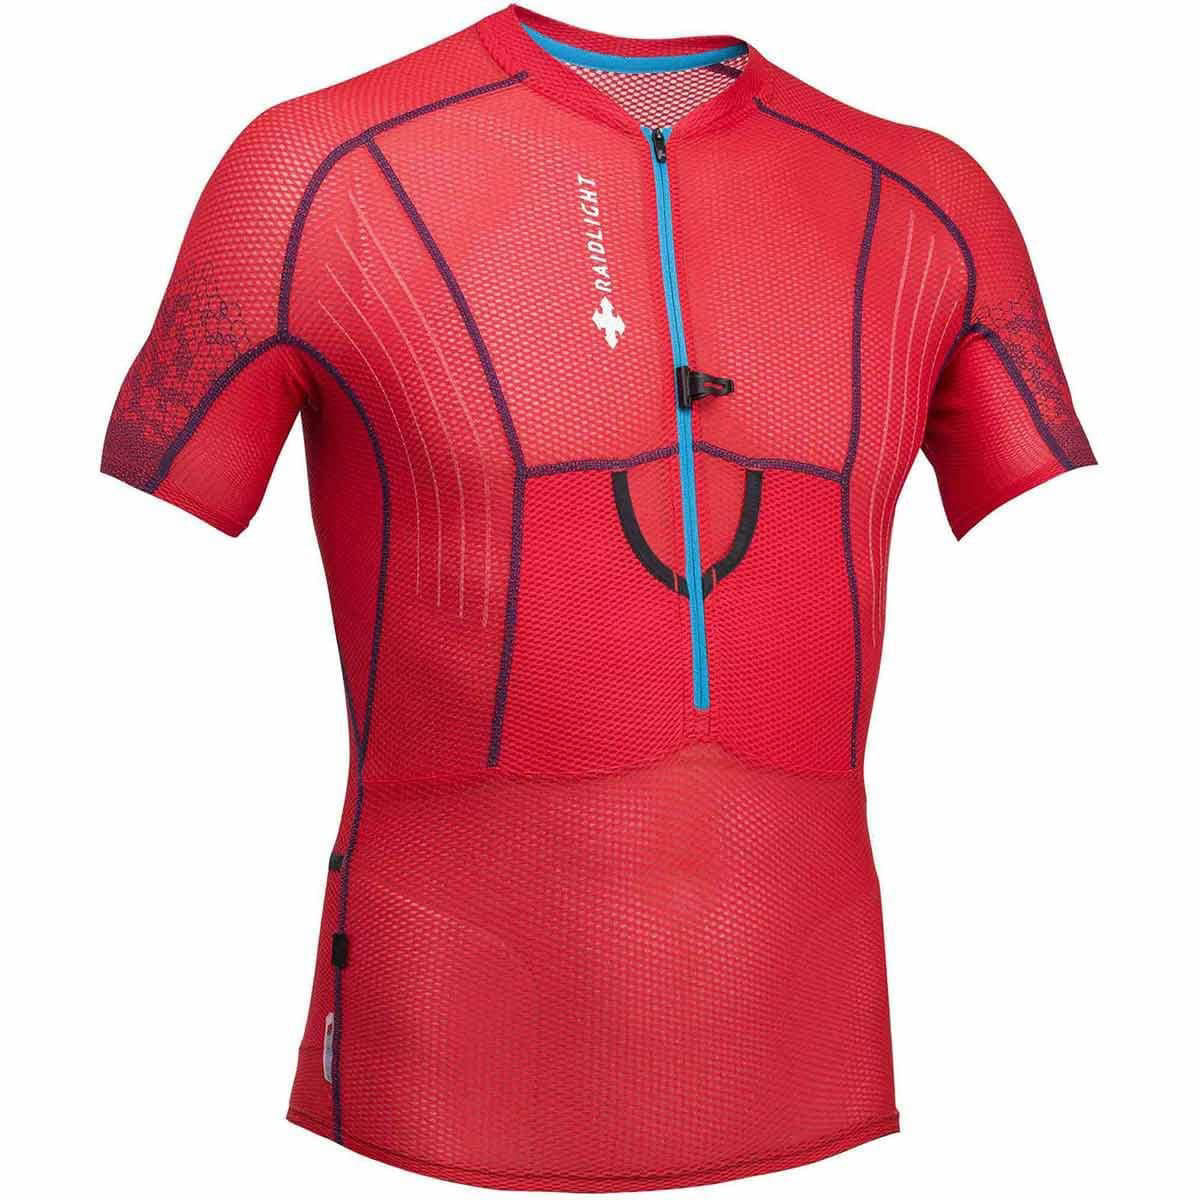 Raidlight XP Fit 3D SS Top (Sample) in Red